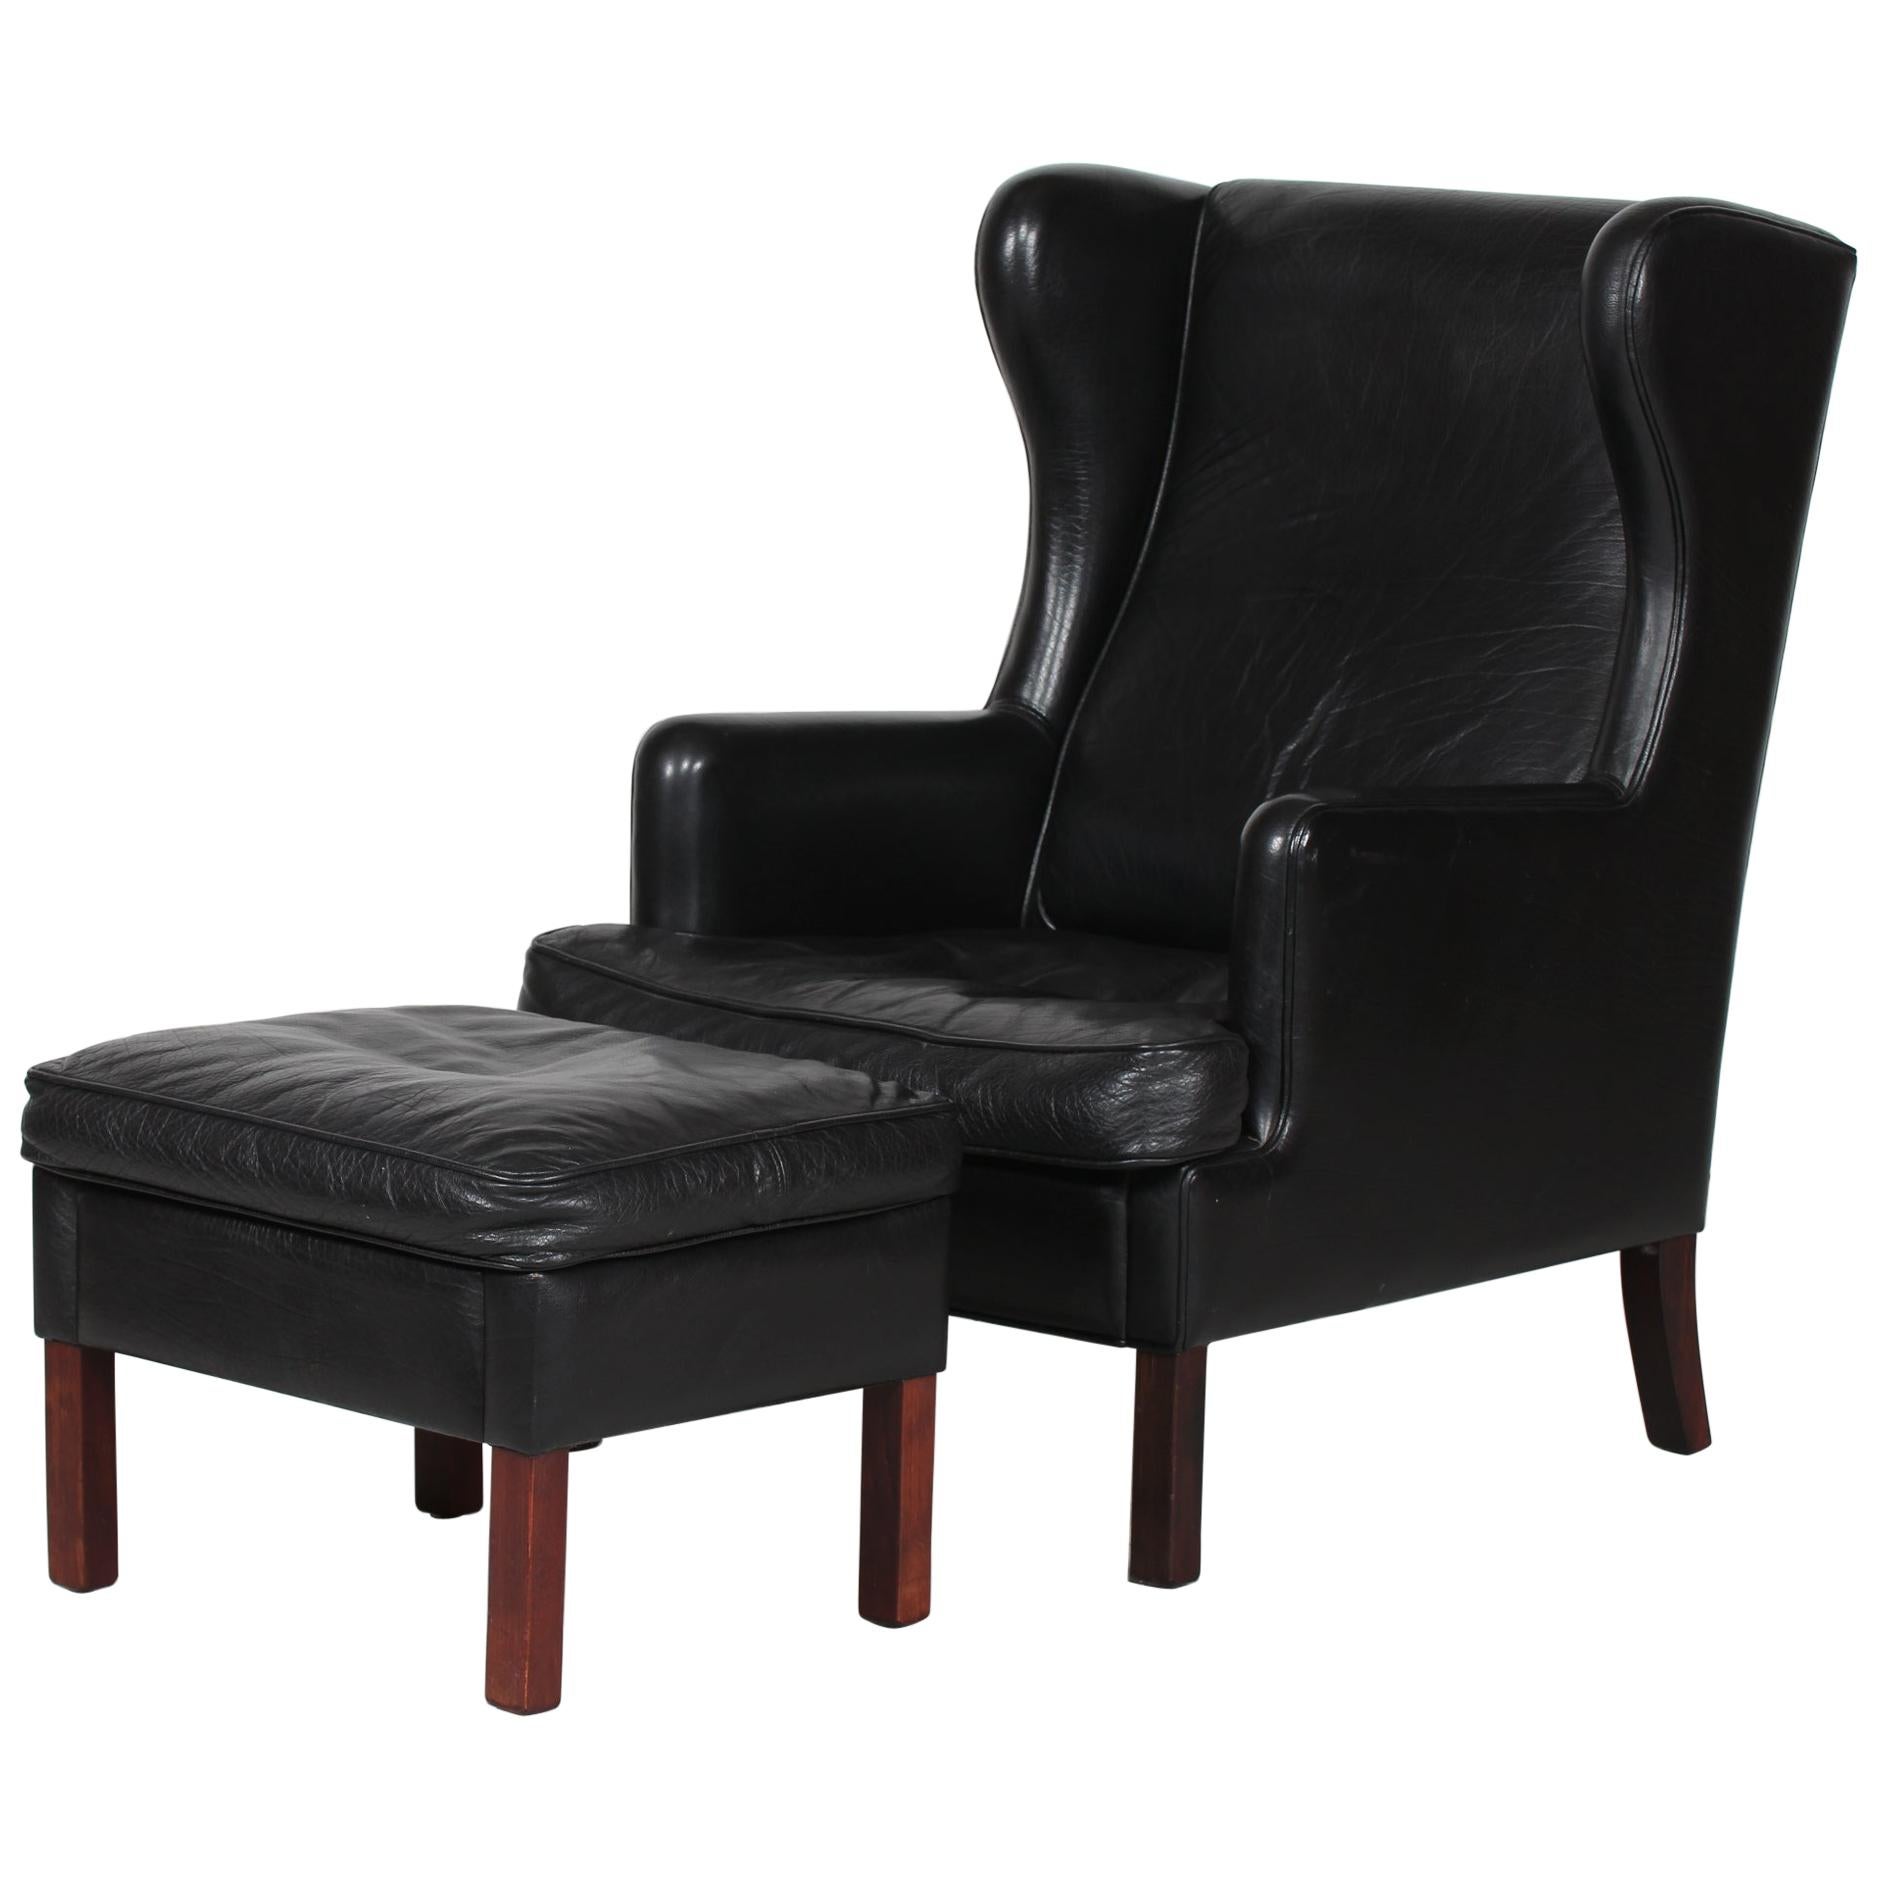 Danish Modern Wingback Chair and Stool with Black Leather in Kaare Klint Style